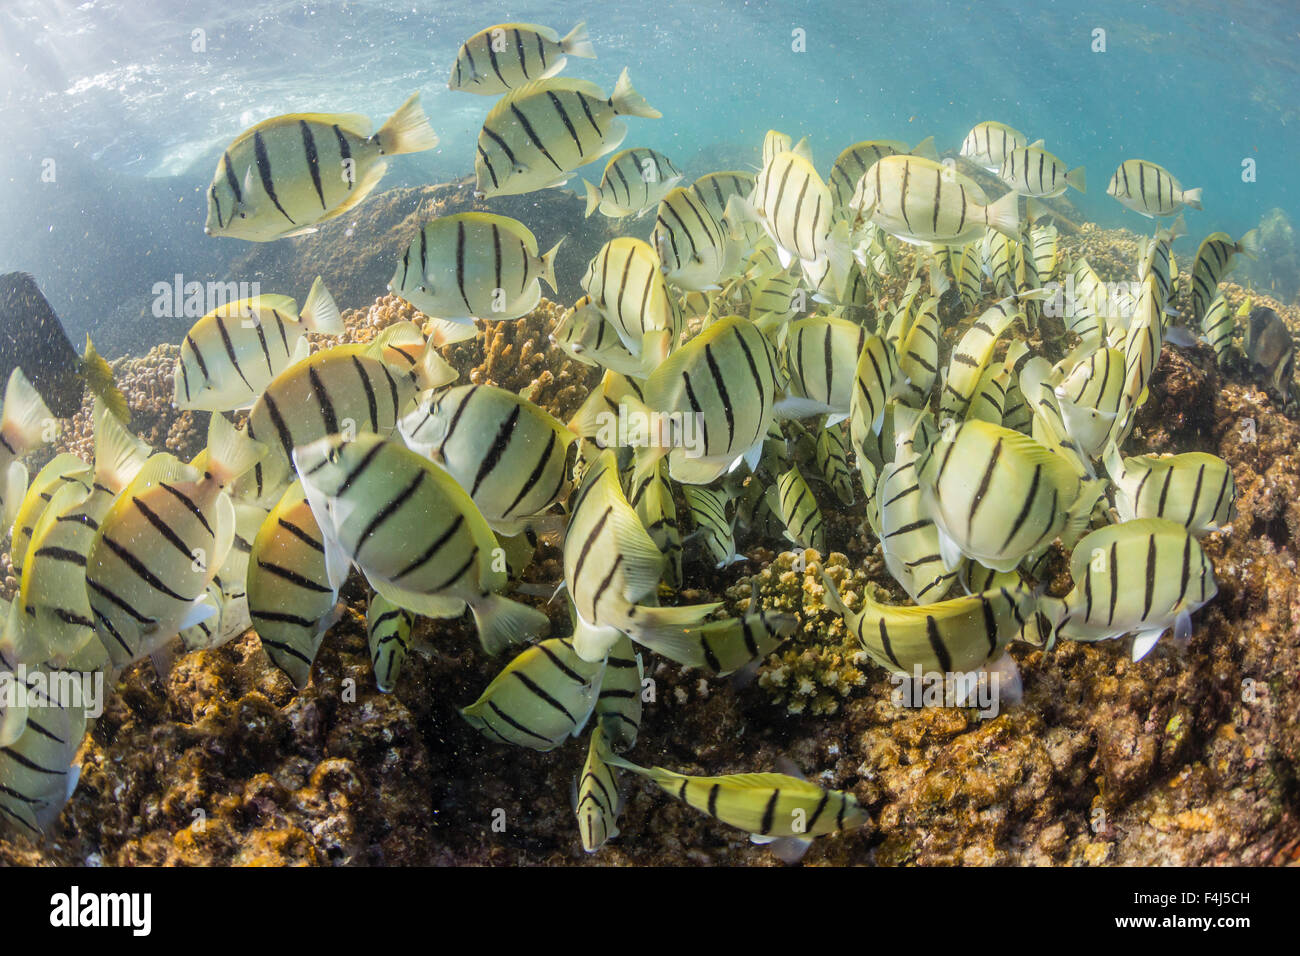 A large school of convict tang on the only living reef in the Sea of Cortez, Cabo Pulmo, Baja California Sur, Mexico Stock Photo